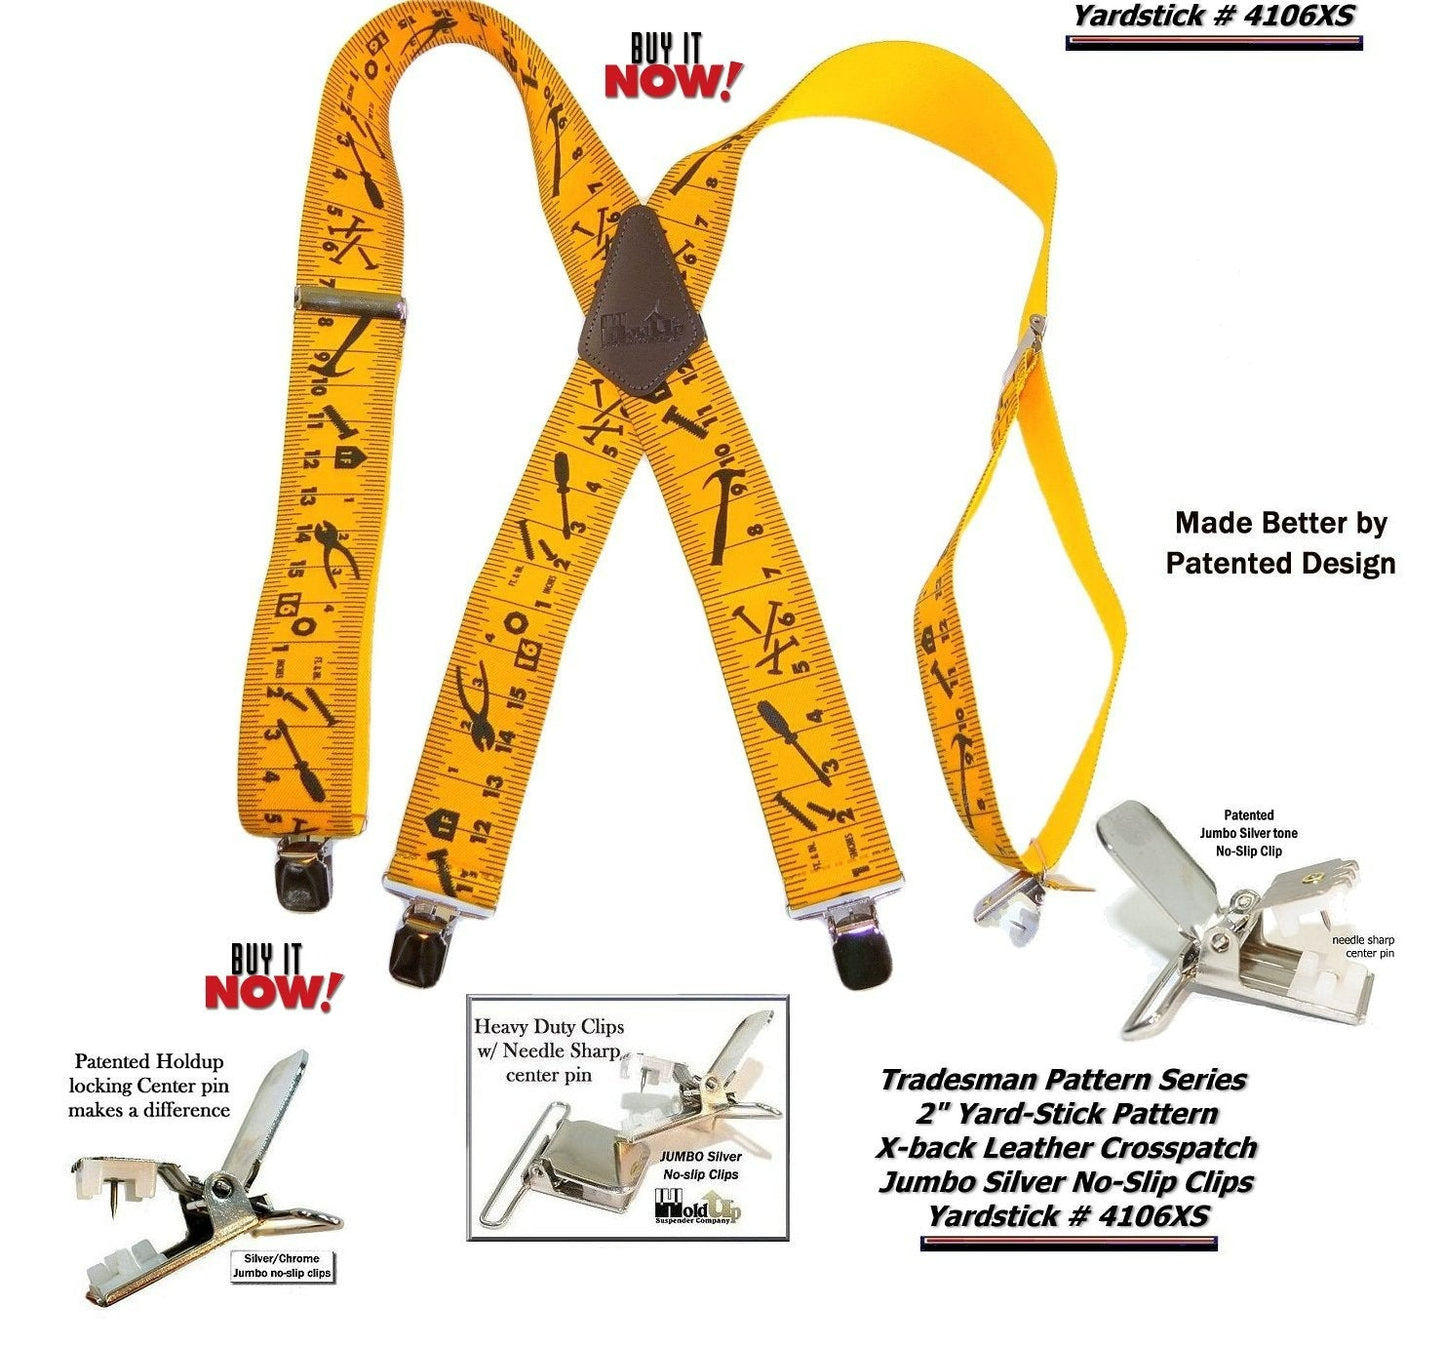 Hold-Ups Tradesman Series 2" Wide Suspenders in Yardstick Pattern with USA Patented No-slip Silver Clips